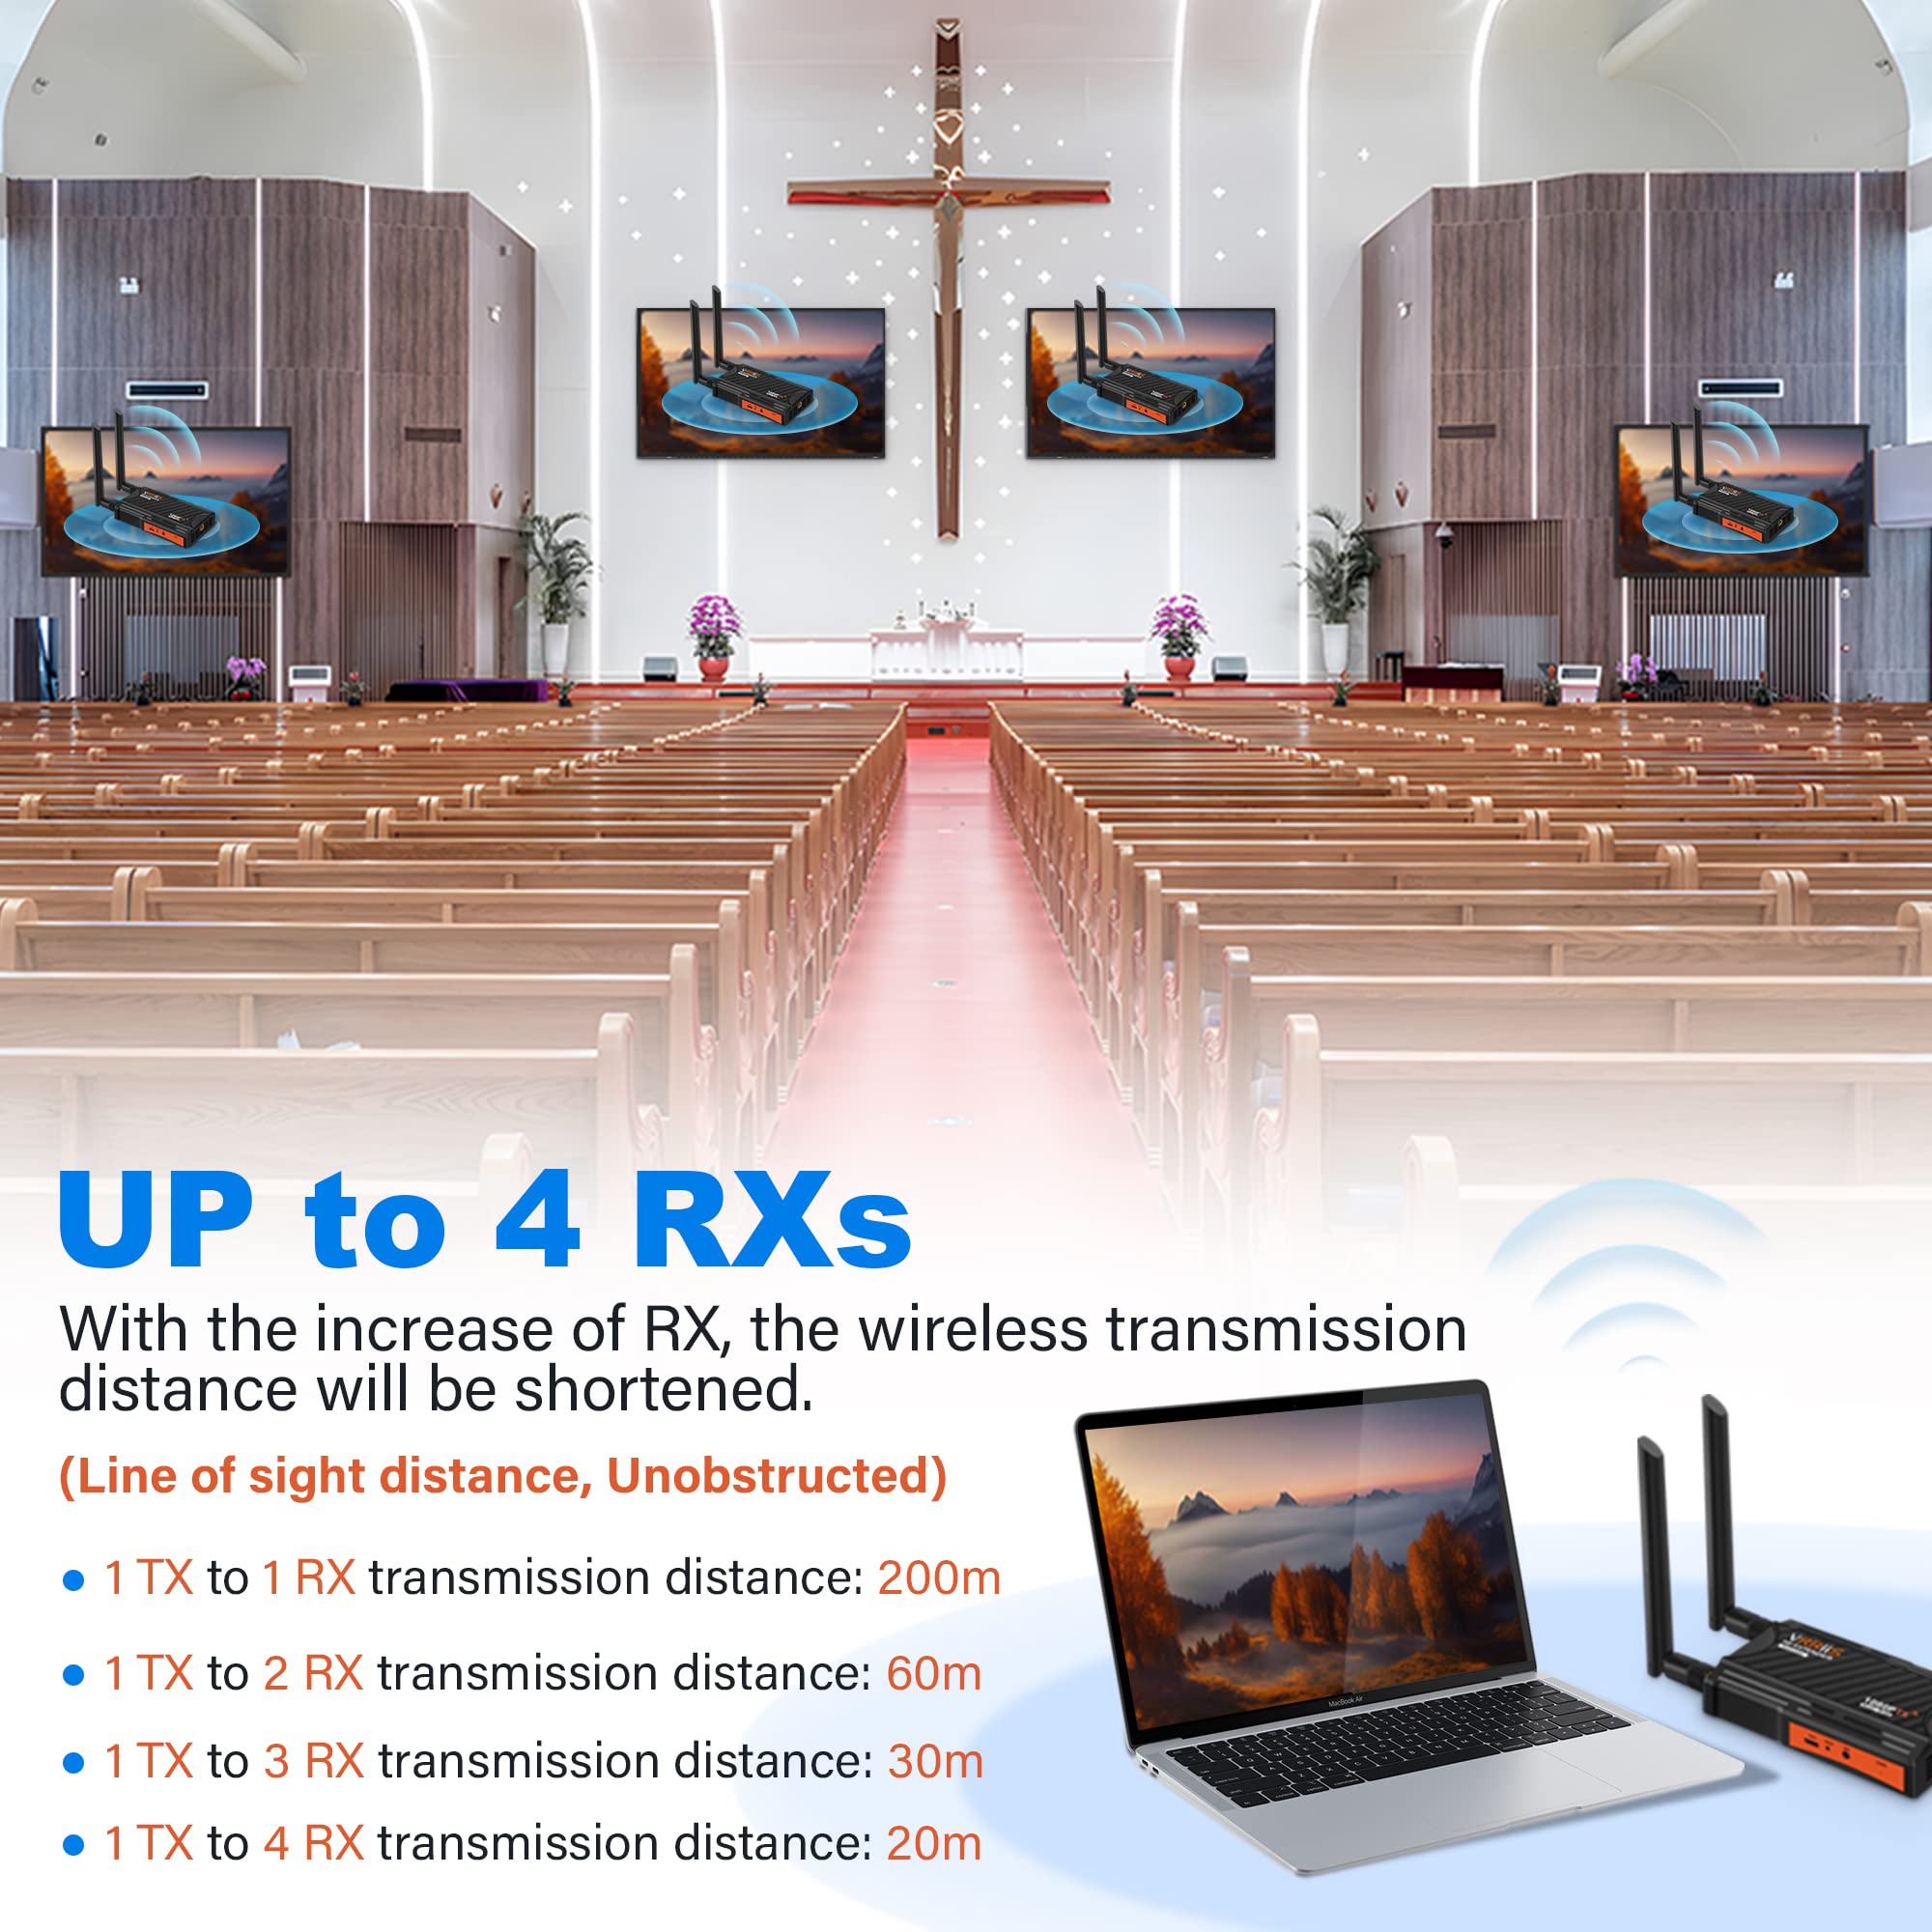 Wireless HDMI Transmitter and Receiver, 1 Transmitter and 3 Receivers (1TX 3RX)